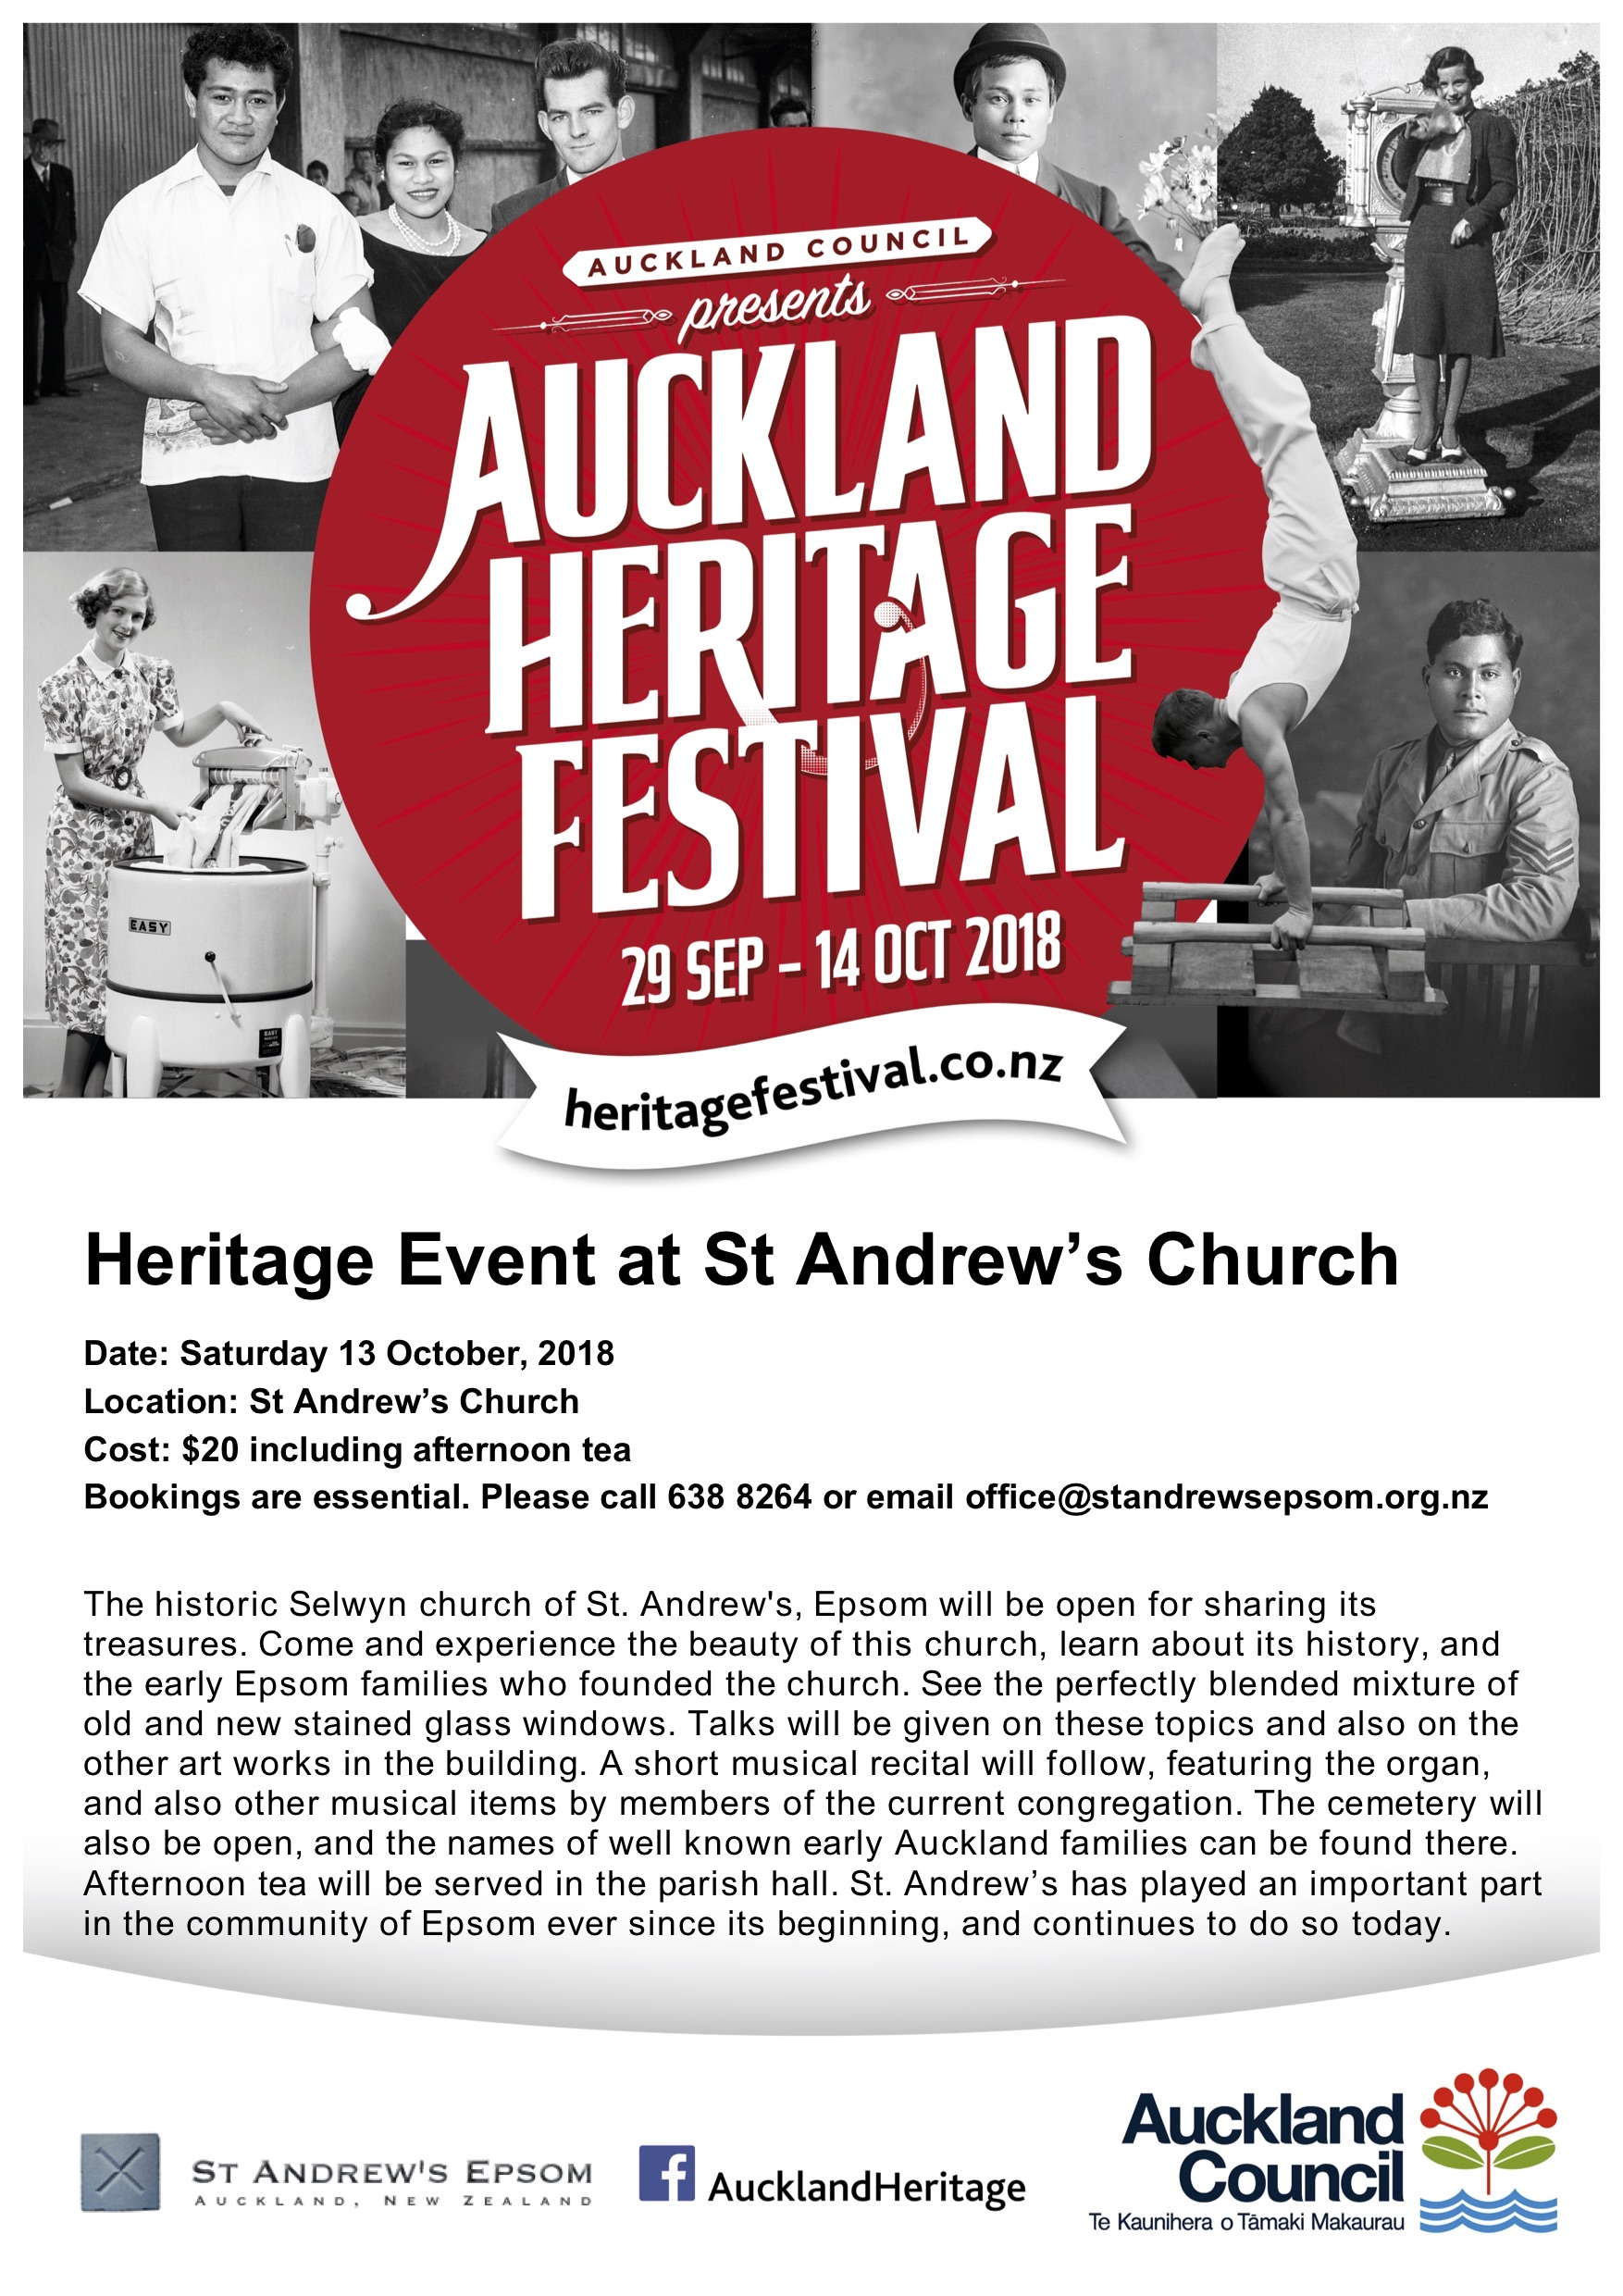 HERITAGE EVENT AT ST ANDREW’S